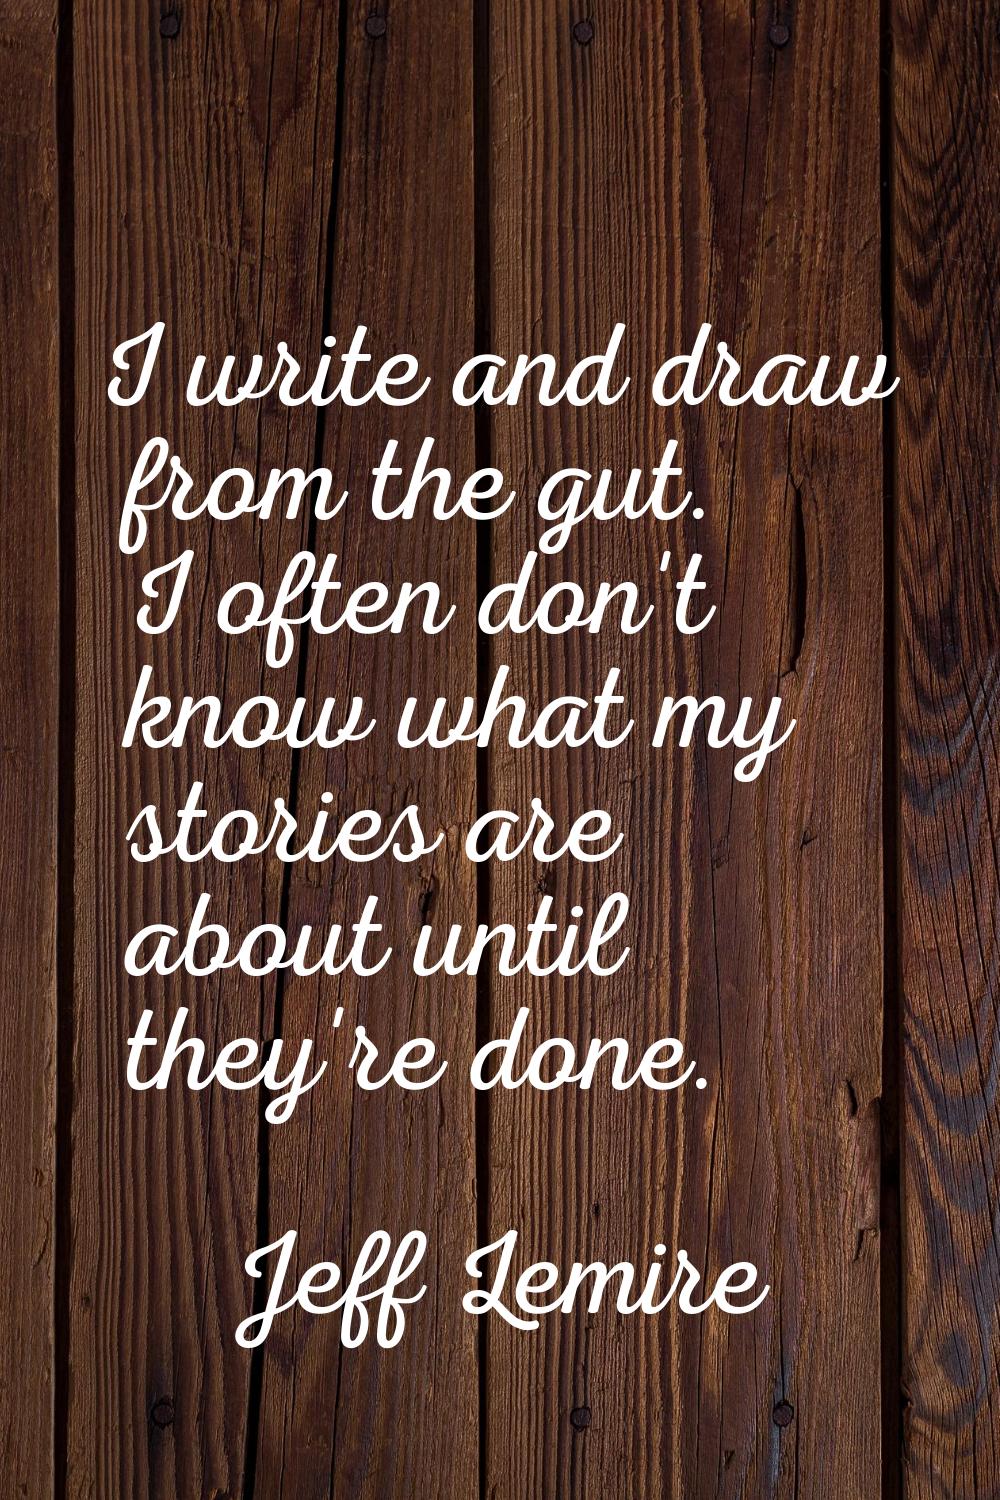 I write and draw from the gut. I often don't know what my stories are about until they're done.